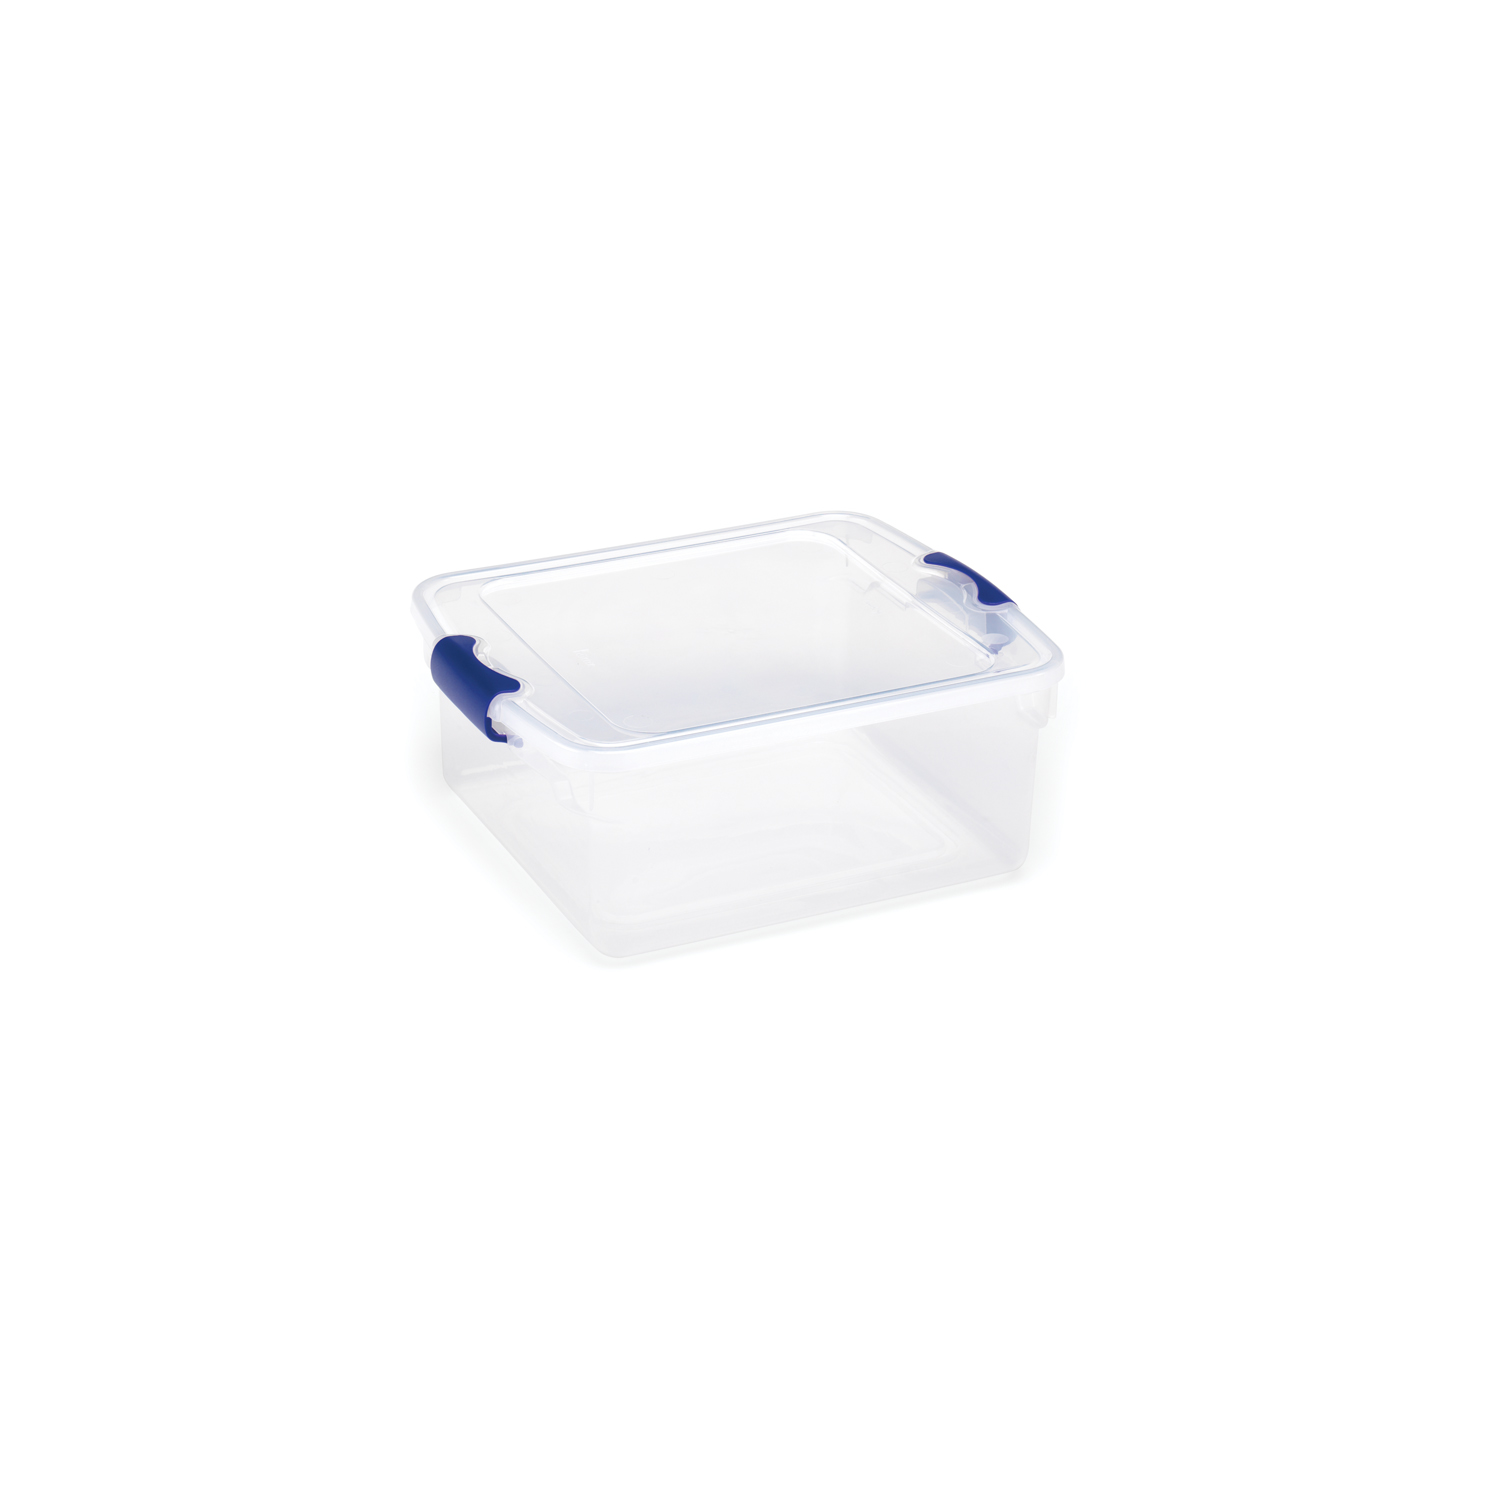 Homz 15.5 Qt Plastic Stackable Storage Containers with Lids, Clear (4 Pack) - image 5 of 7